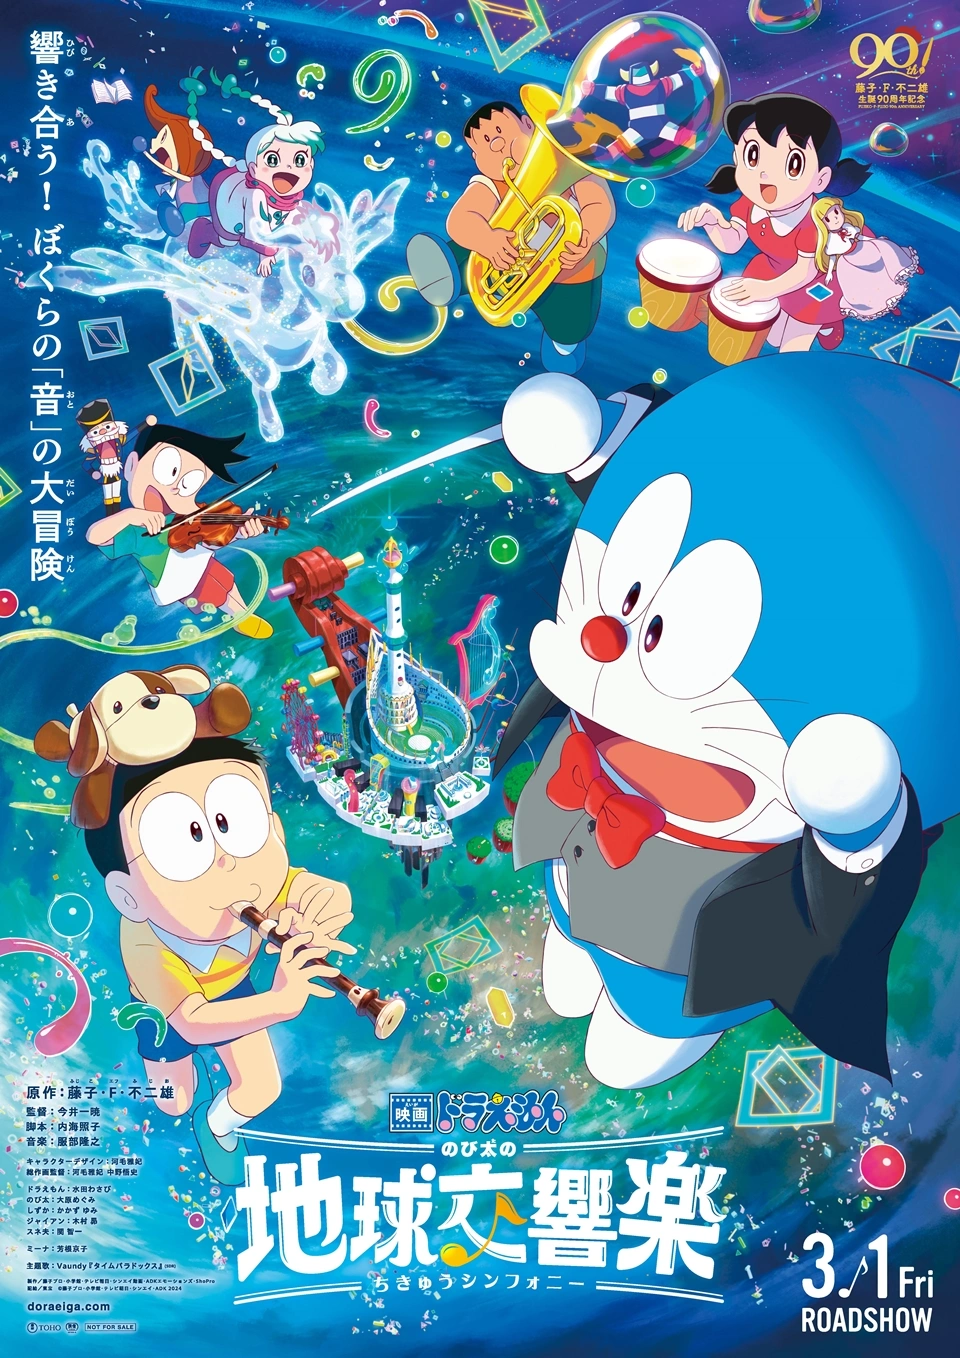 Doraemon's 43rd Anime Feature Film Dominates Japanese Box Office in Opening Weekend, Get Ahead of Haikyuu Film